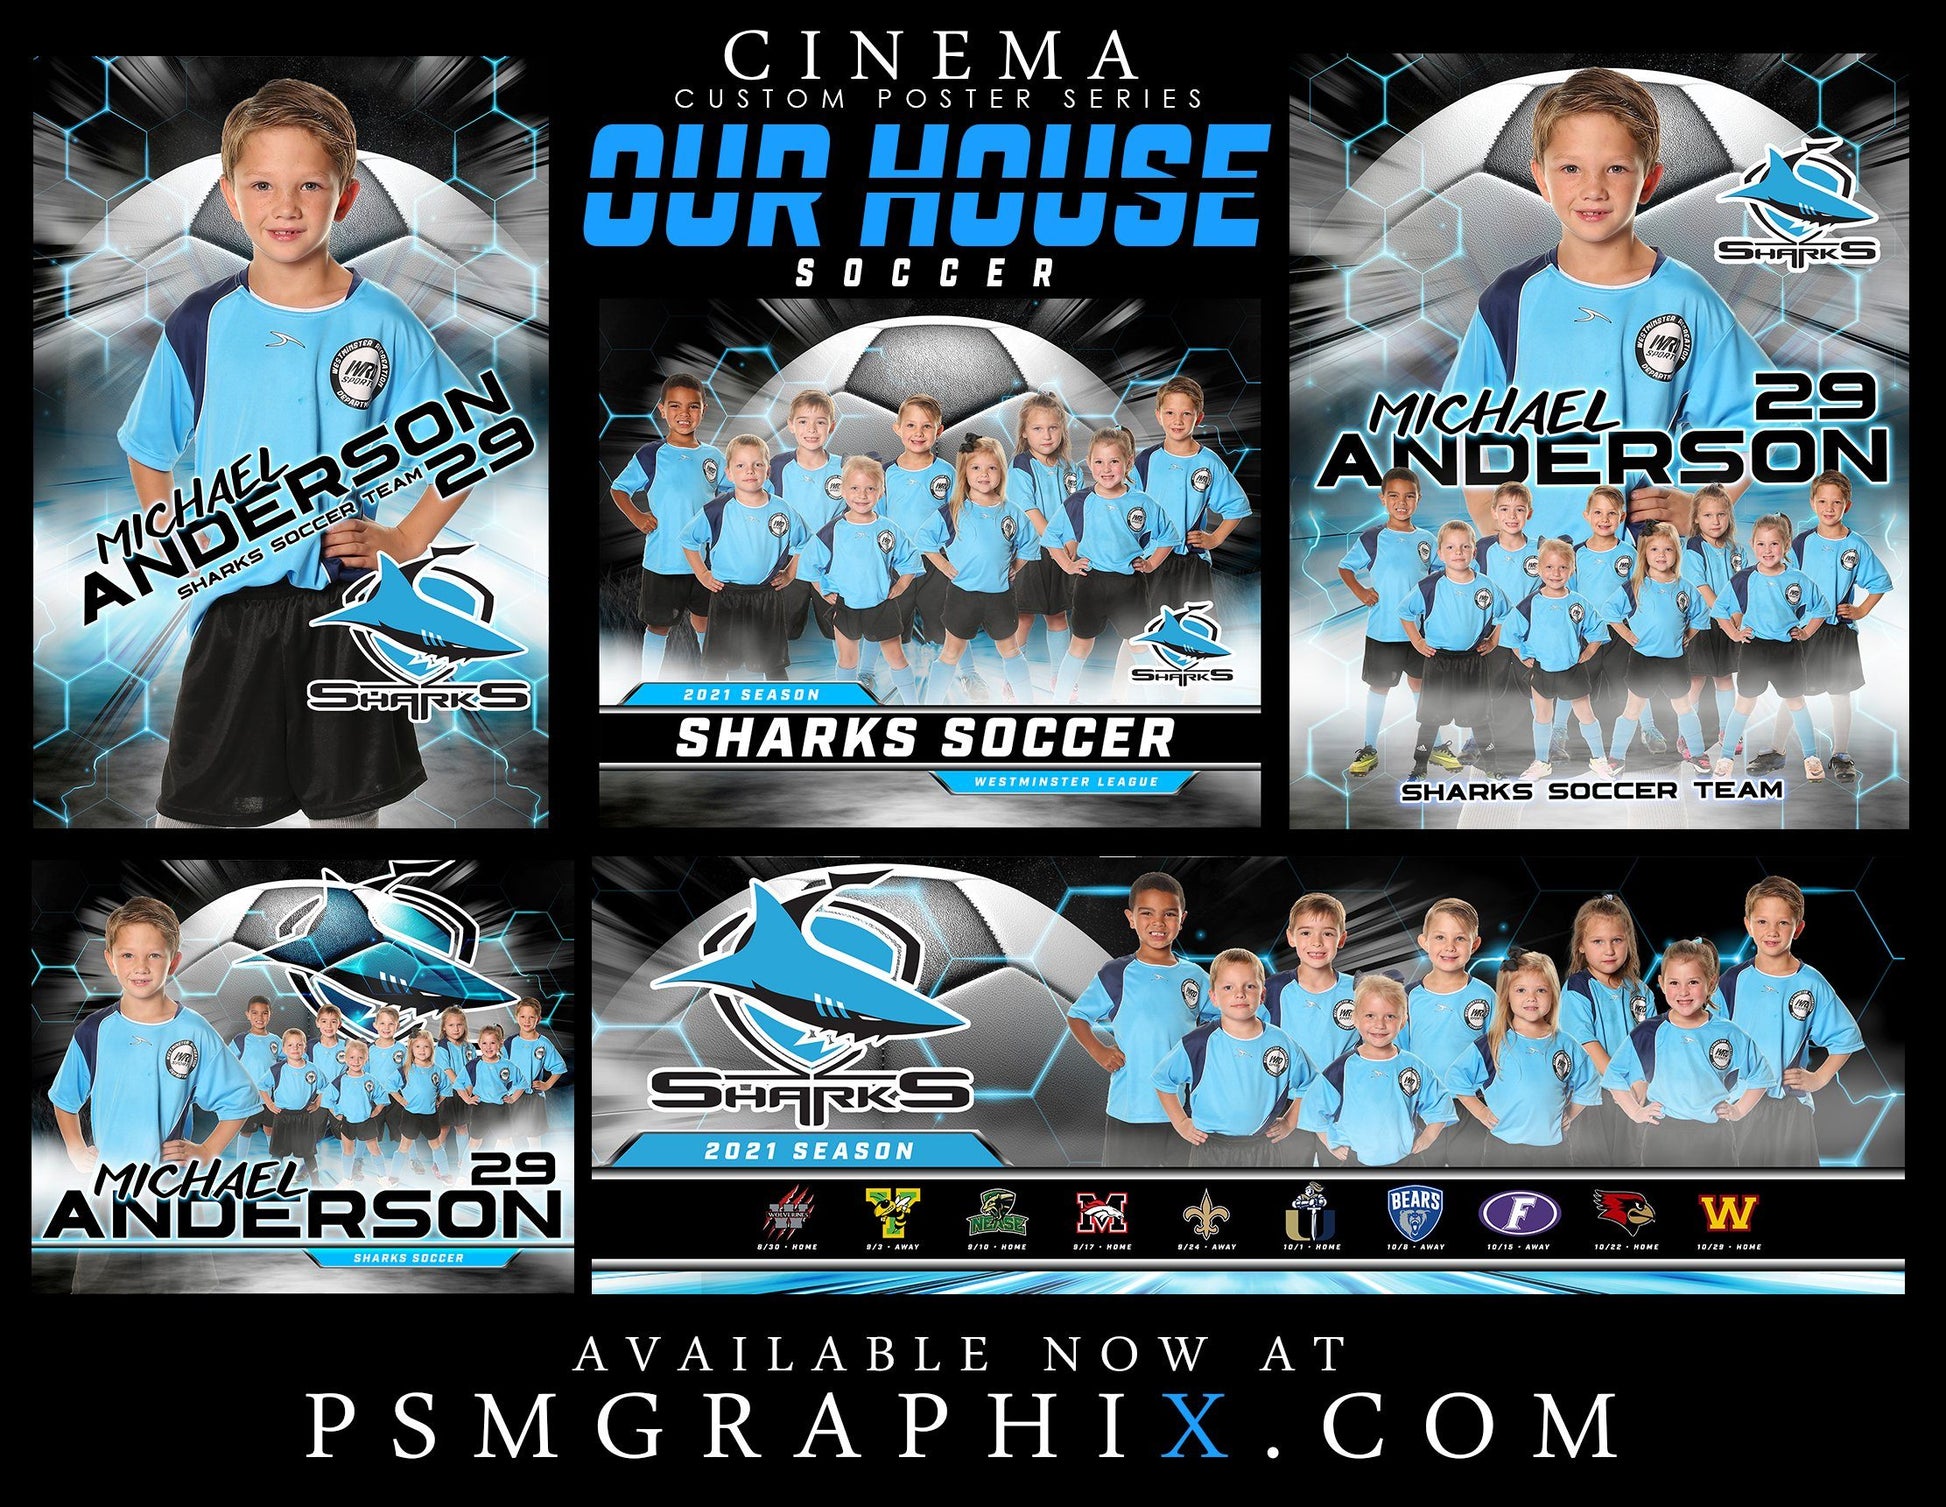 Our House - Soccer - FULL Collection -  Cinema Series - Game Time Collection-Photoshop Template - PSMGraphix